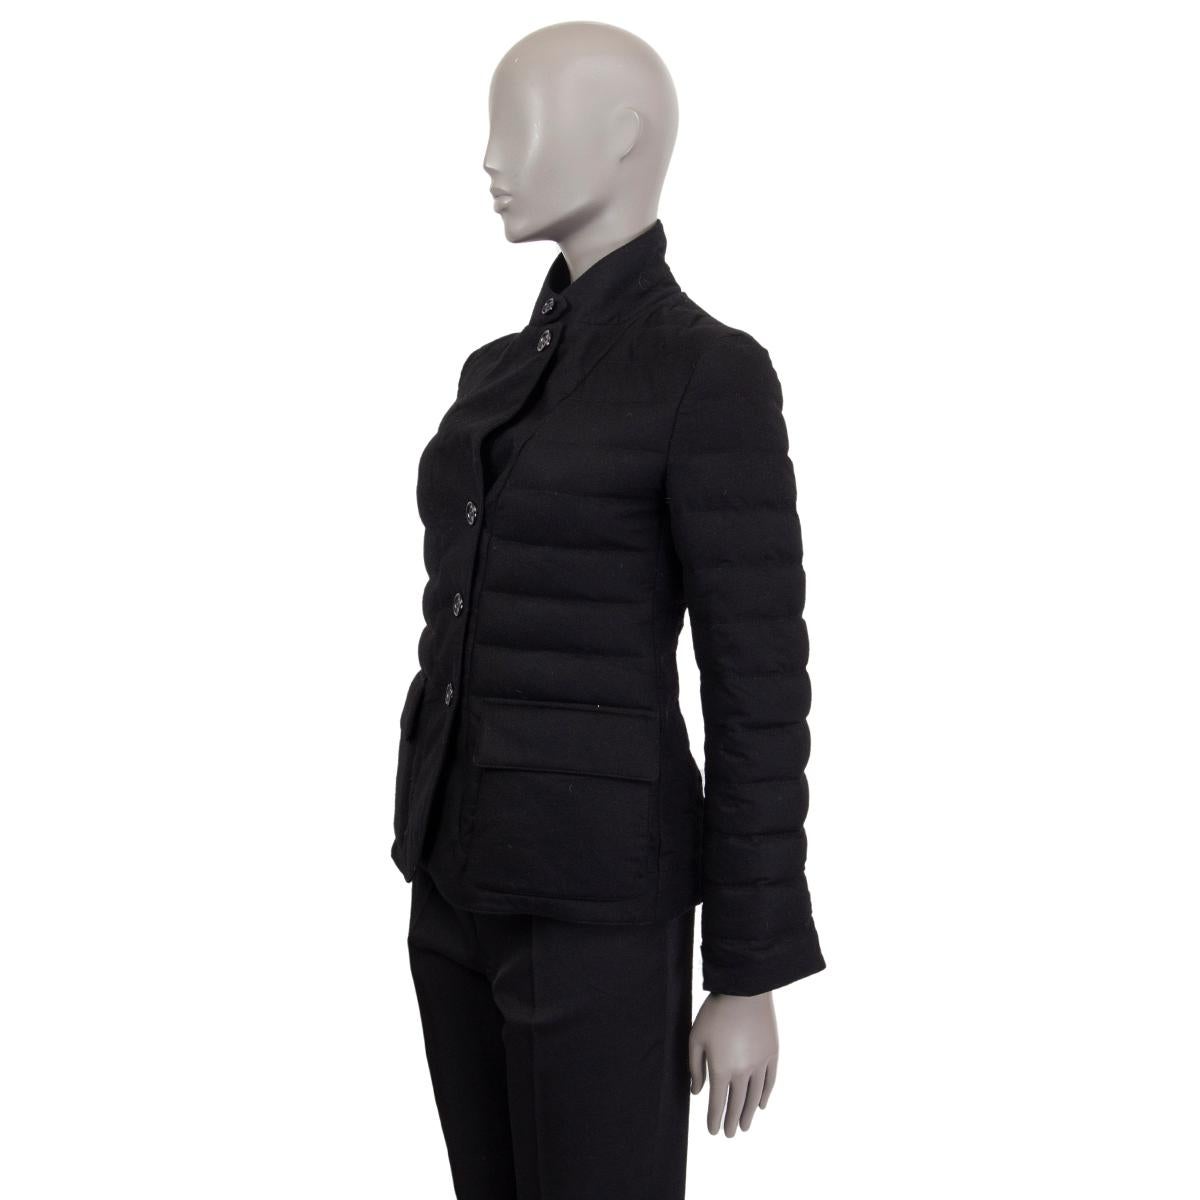 Loro Piana quilted blazer-jacket in black cashmere (100%) with down padding and front flap pockets. Closes on the front with buttons. Lined in polyester (100%). Has been worn and is in excellent condition.

Tag Size 38
Size XS
Shoulder Width 39cm